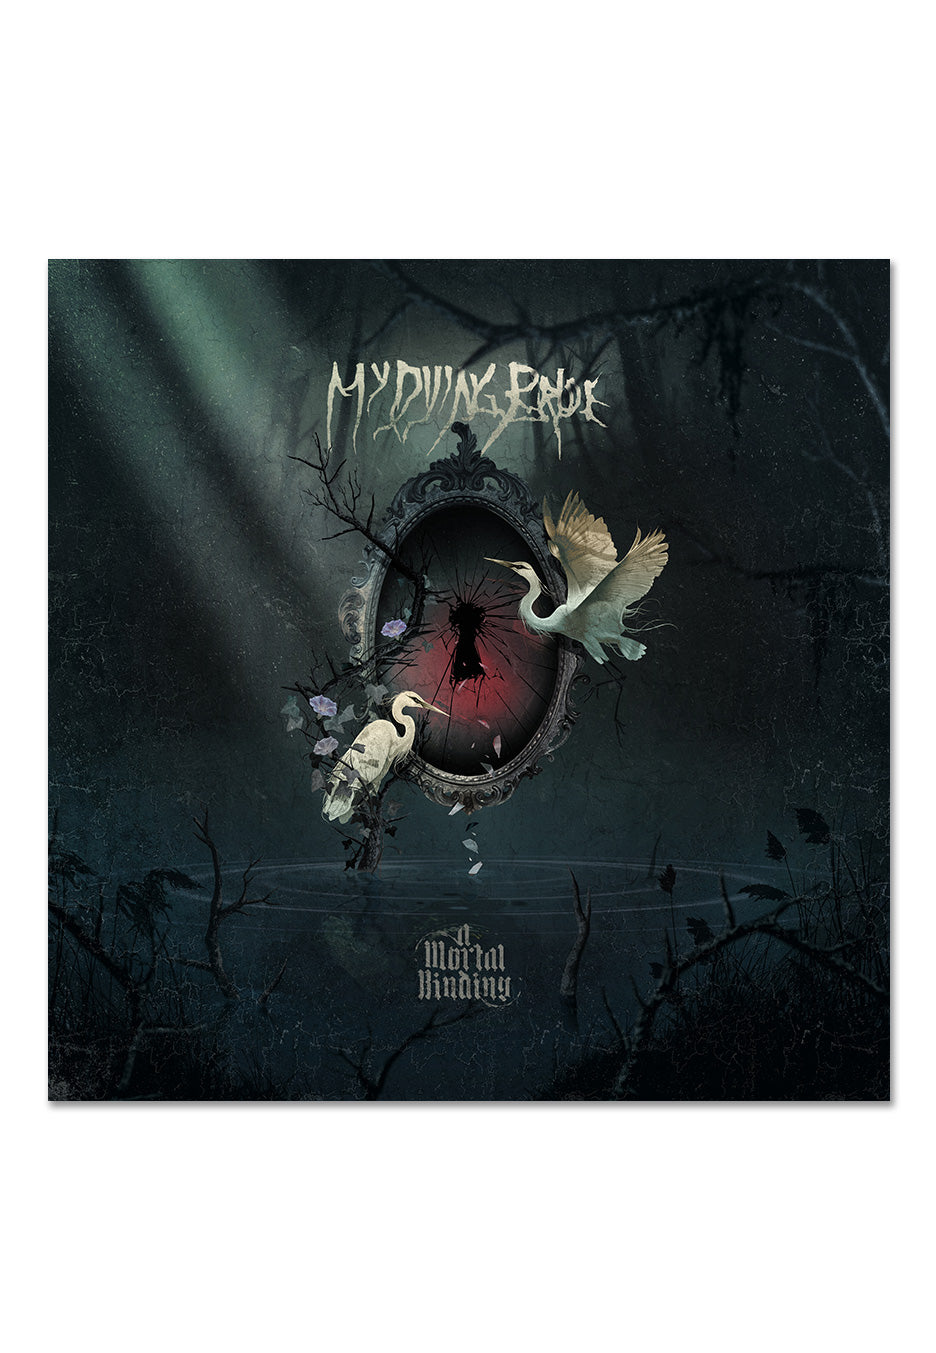 My Dying Bride - A Mortal Binding Green - Colored 2 Vinyl